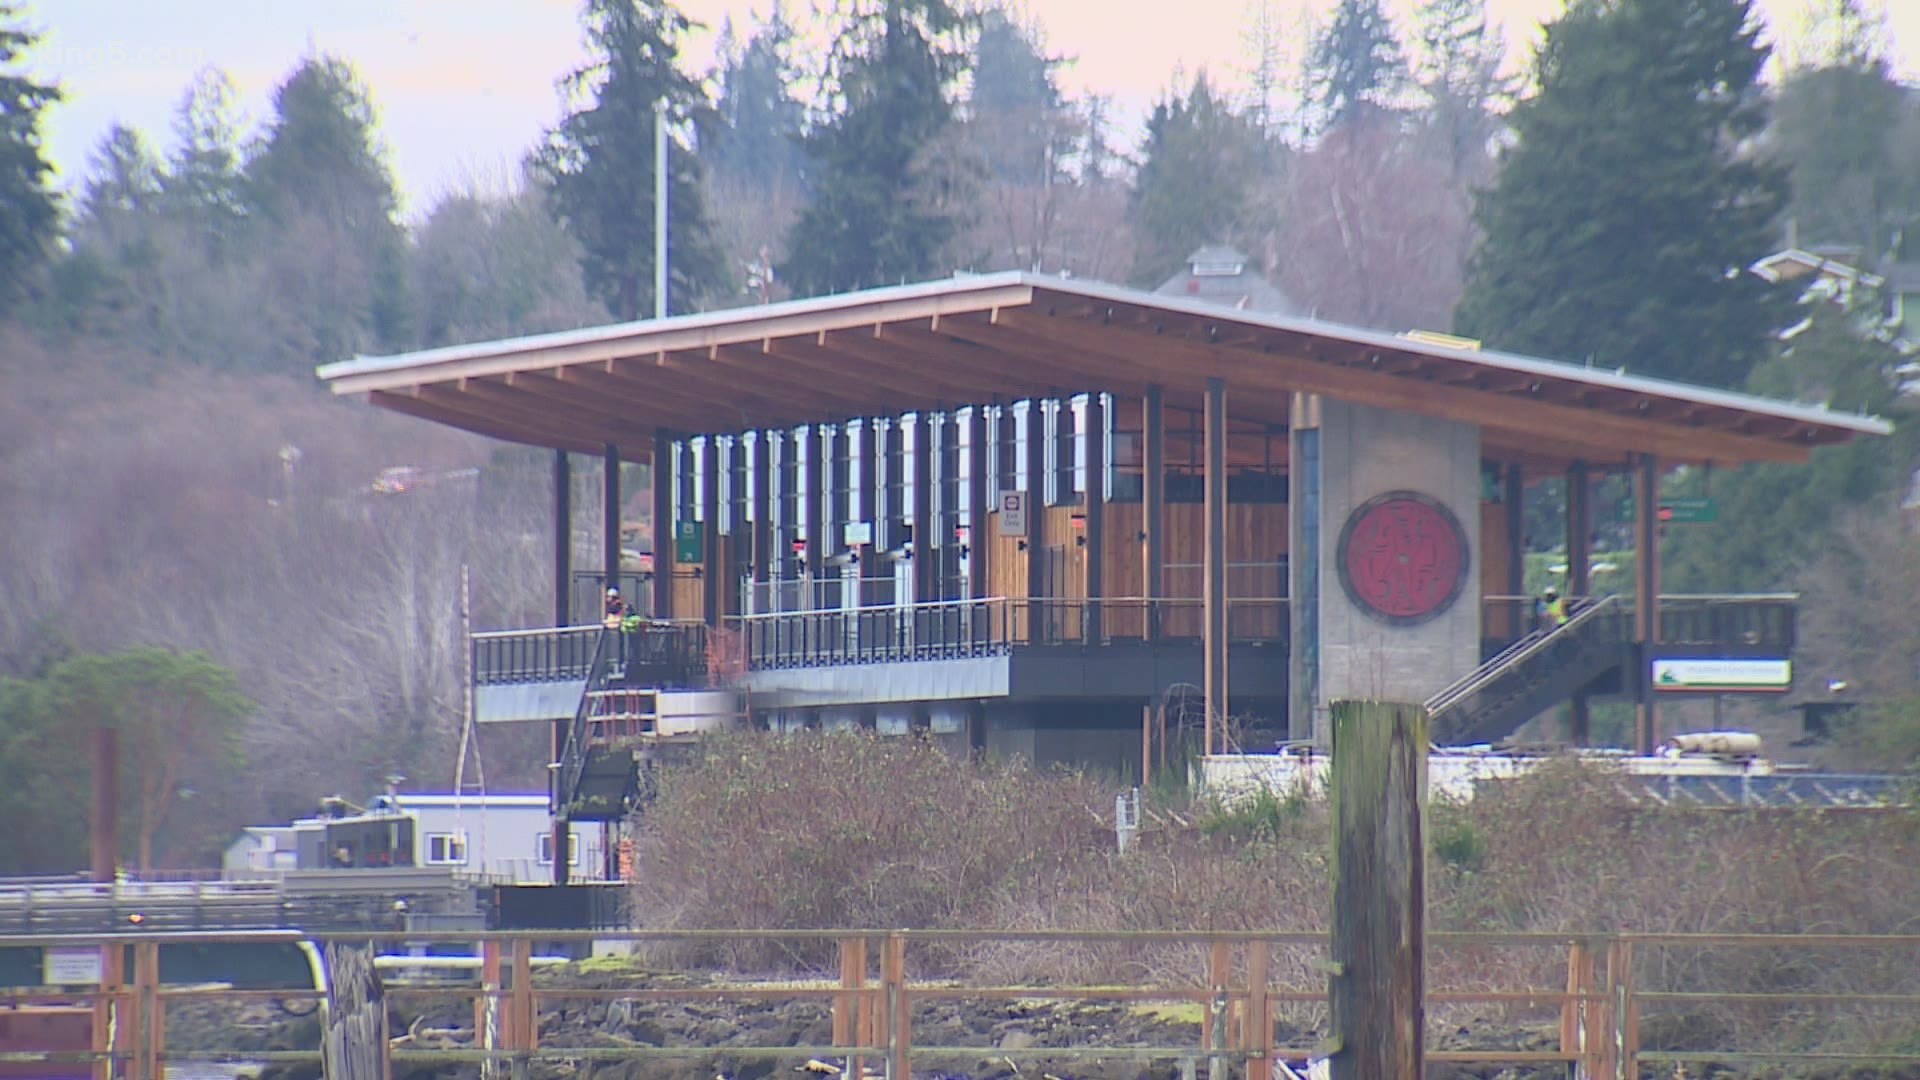 Mukilteo has the first new ferry terminal on Puget Sound in 40 years.